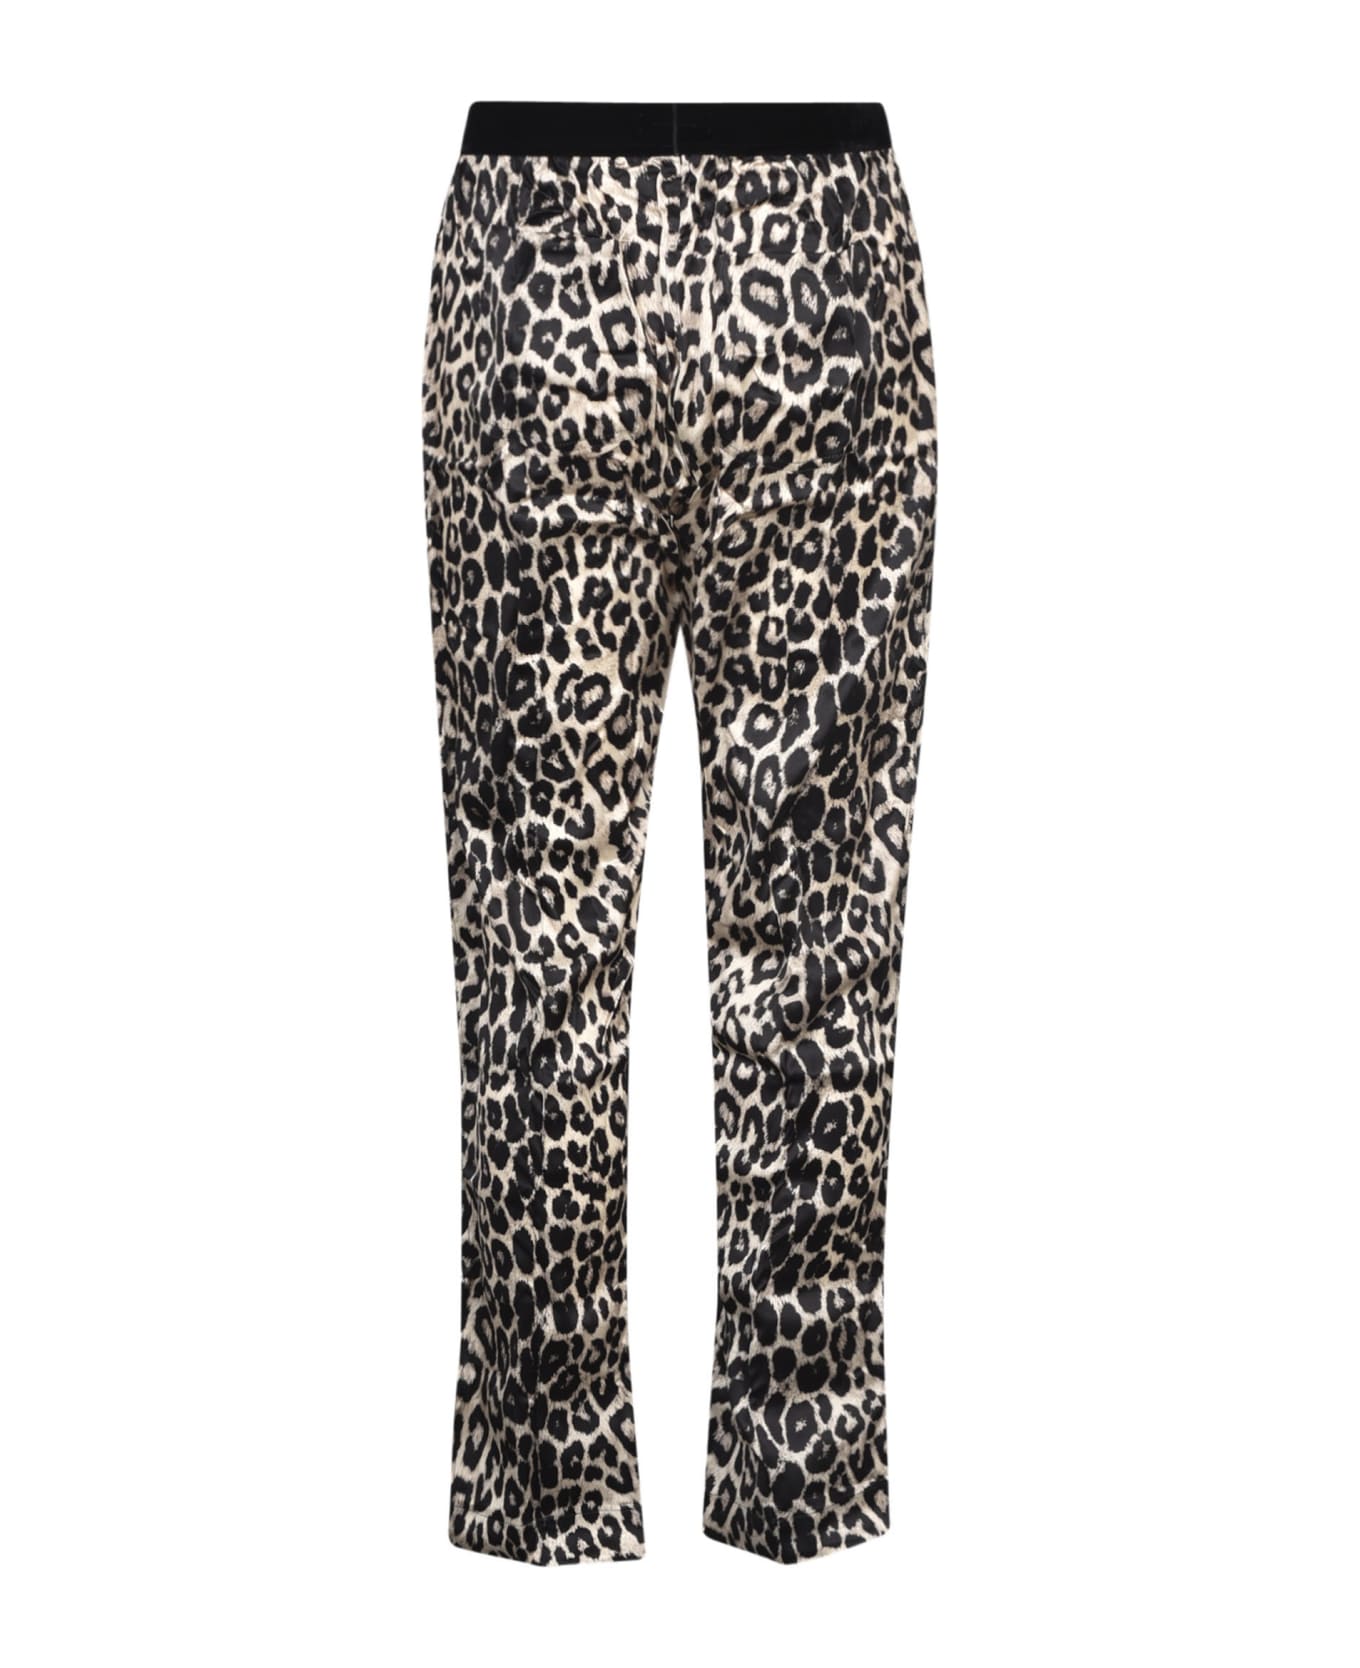 Tom Ford Silk Pajama Printed Trousers - SNOW LEOPARD ボトムス